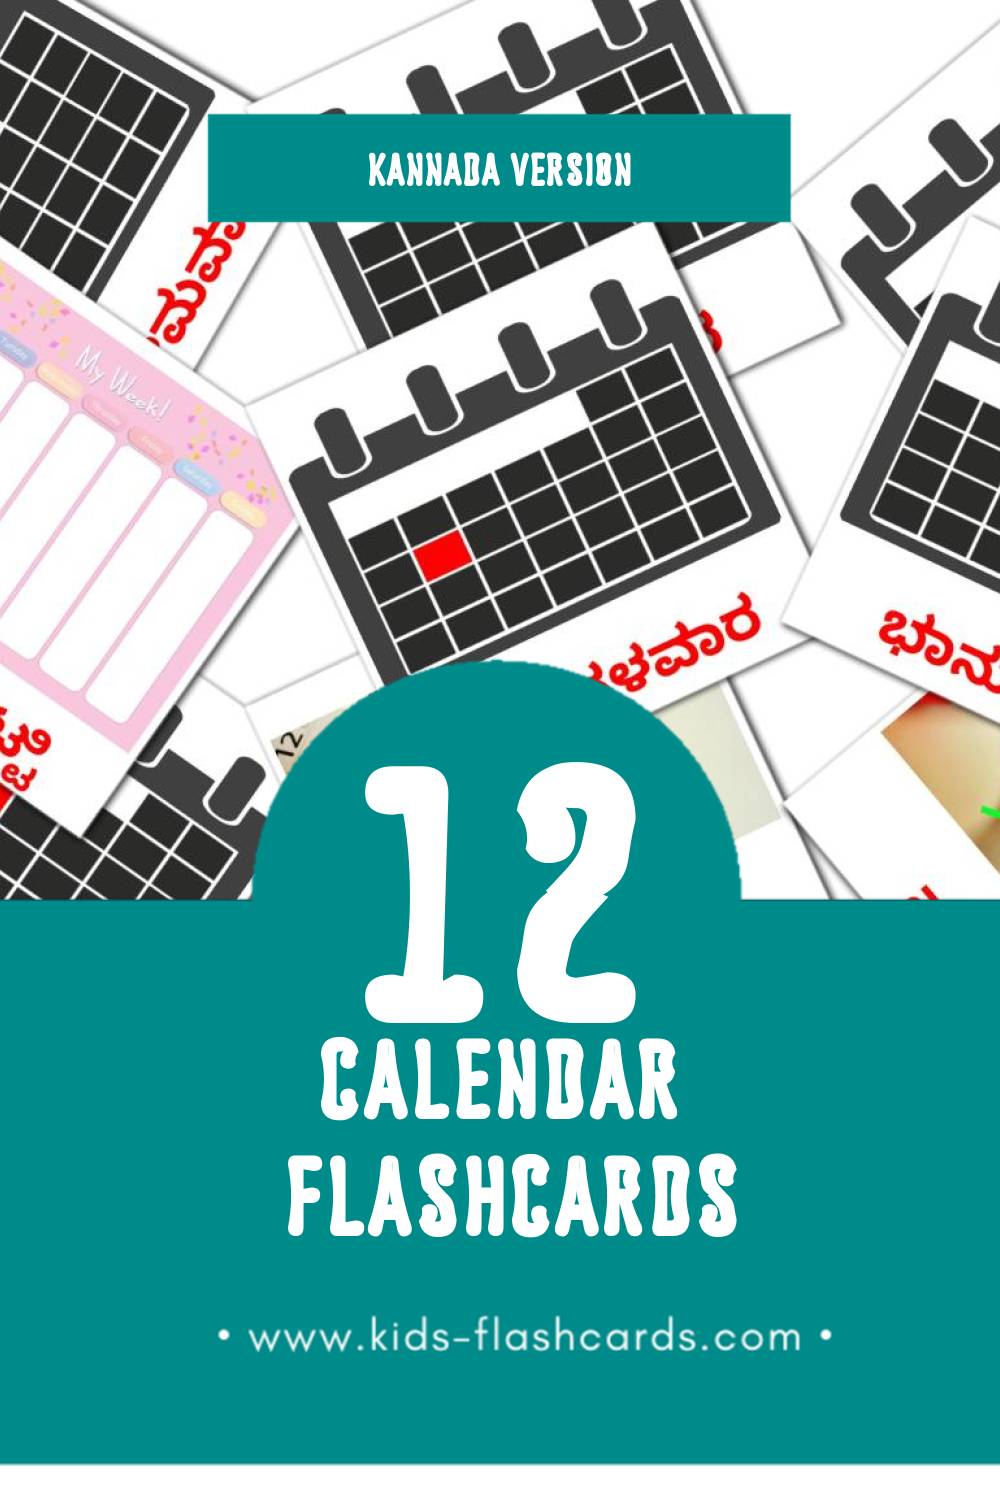 Visual ಕ್ಯಾಲೆಂಡರ್ Flashcards for Toddlers (12 cards in Kannada)